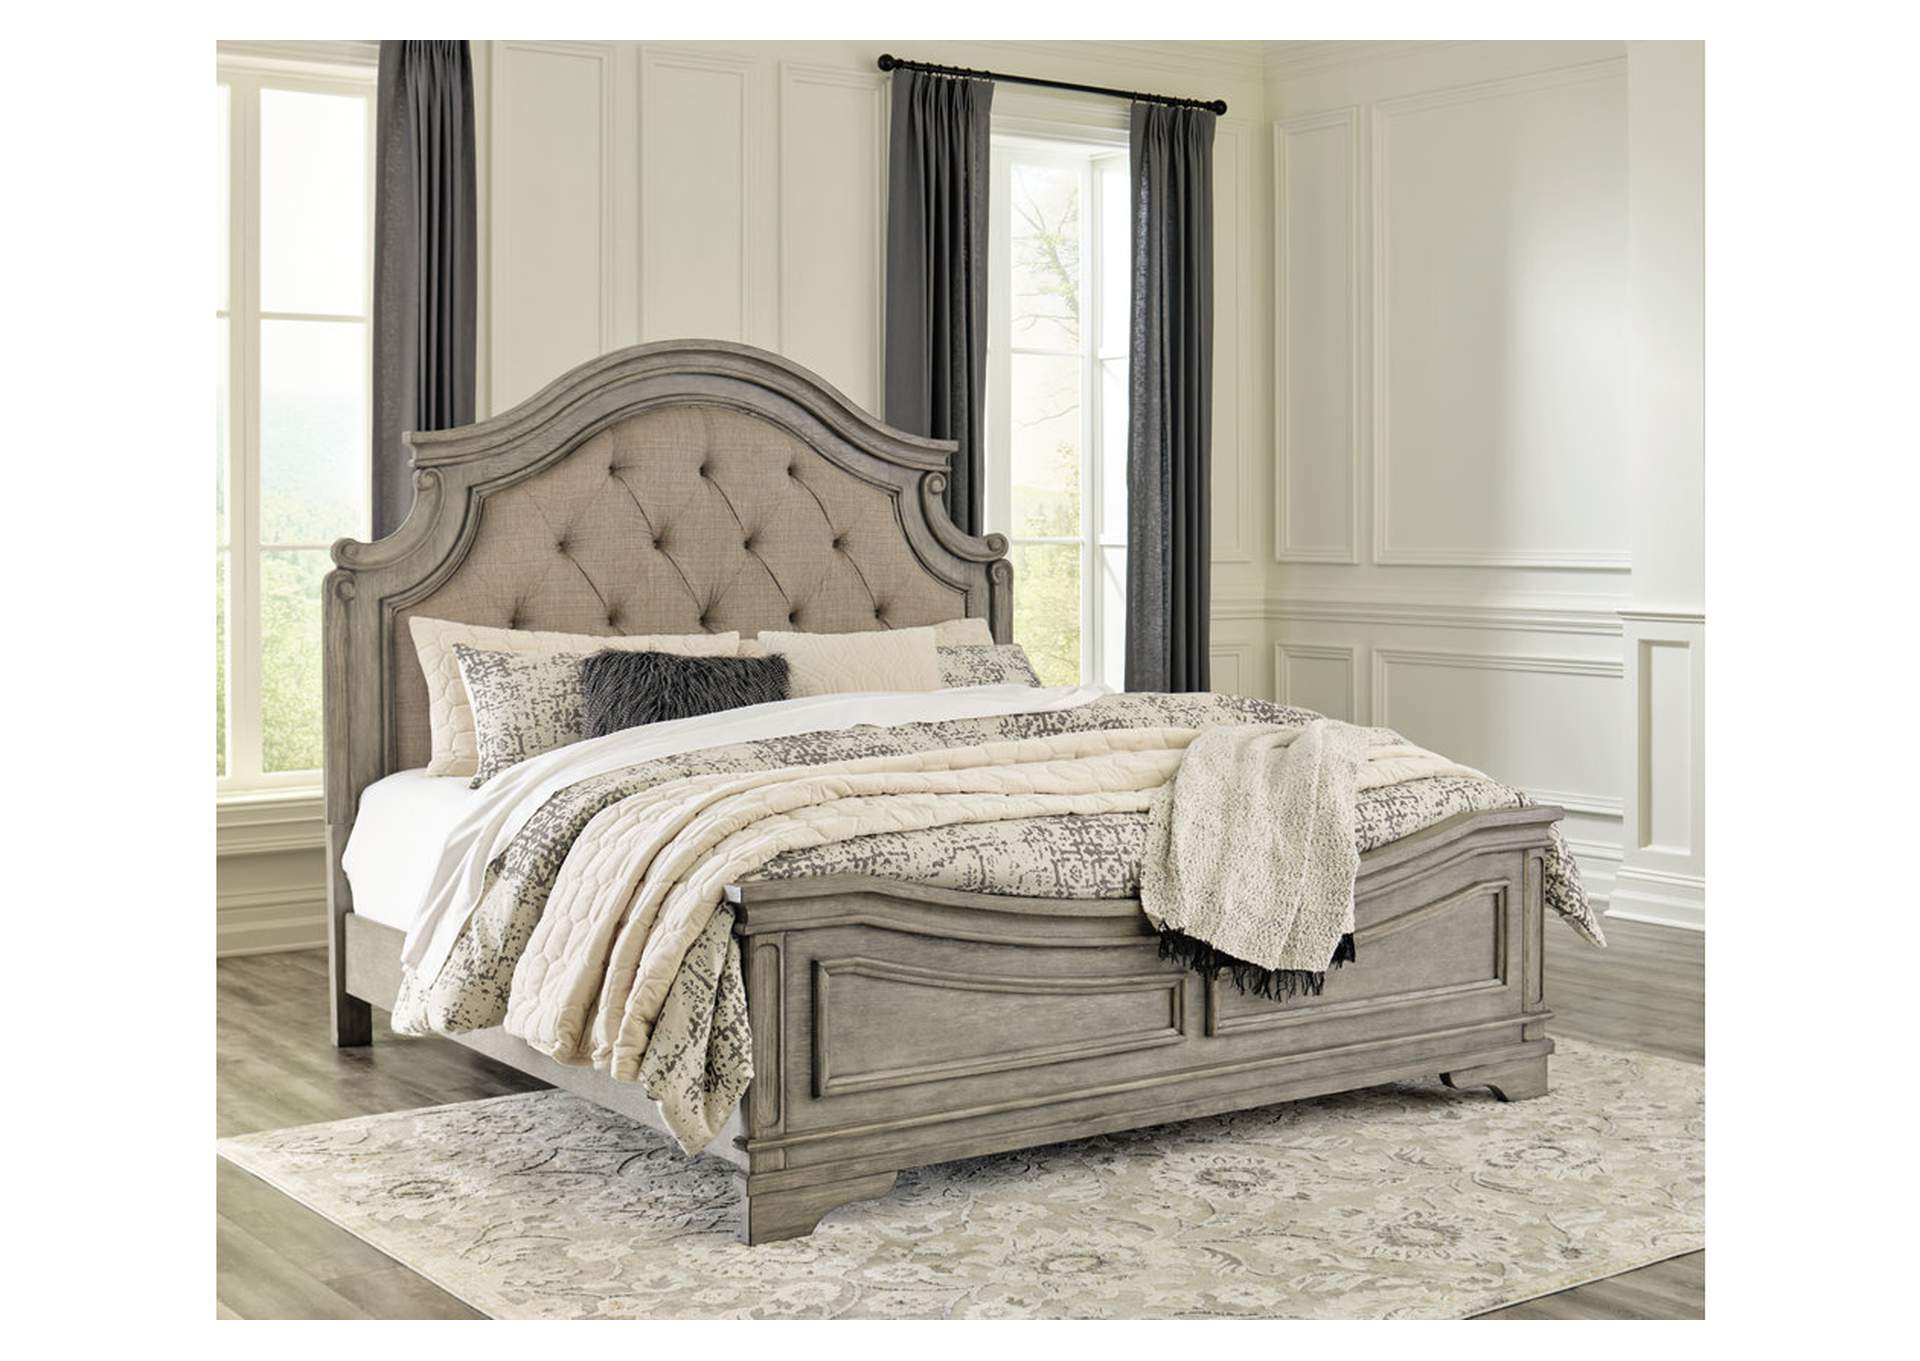 Lodenbay King Panel Bed,Signature Design By Ashley